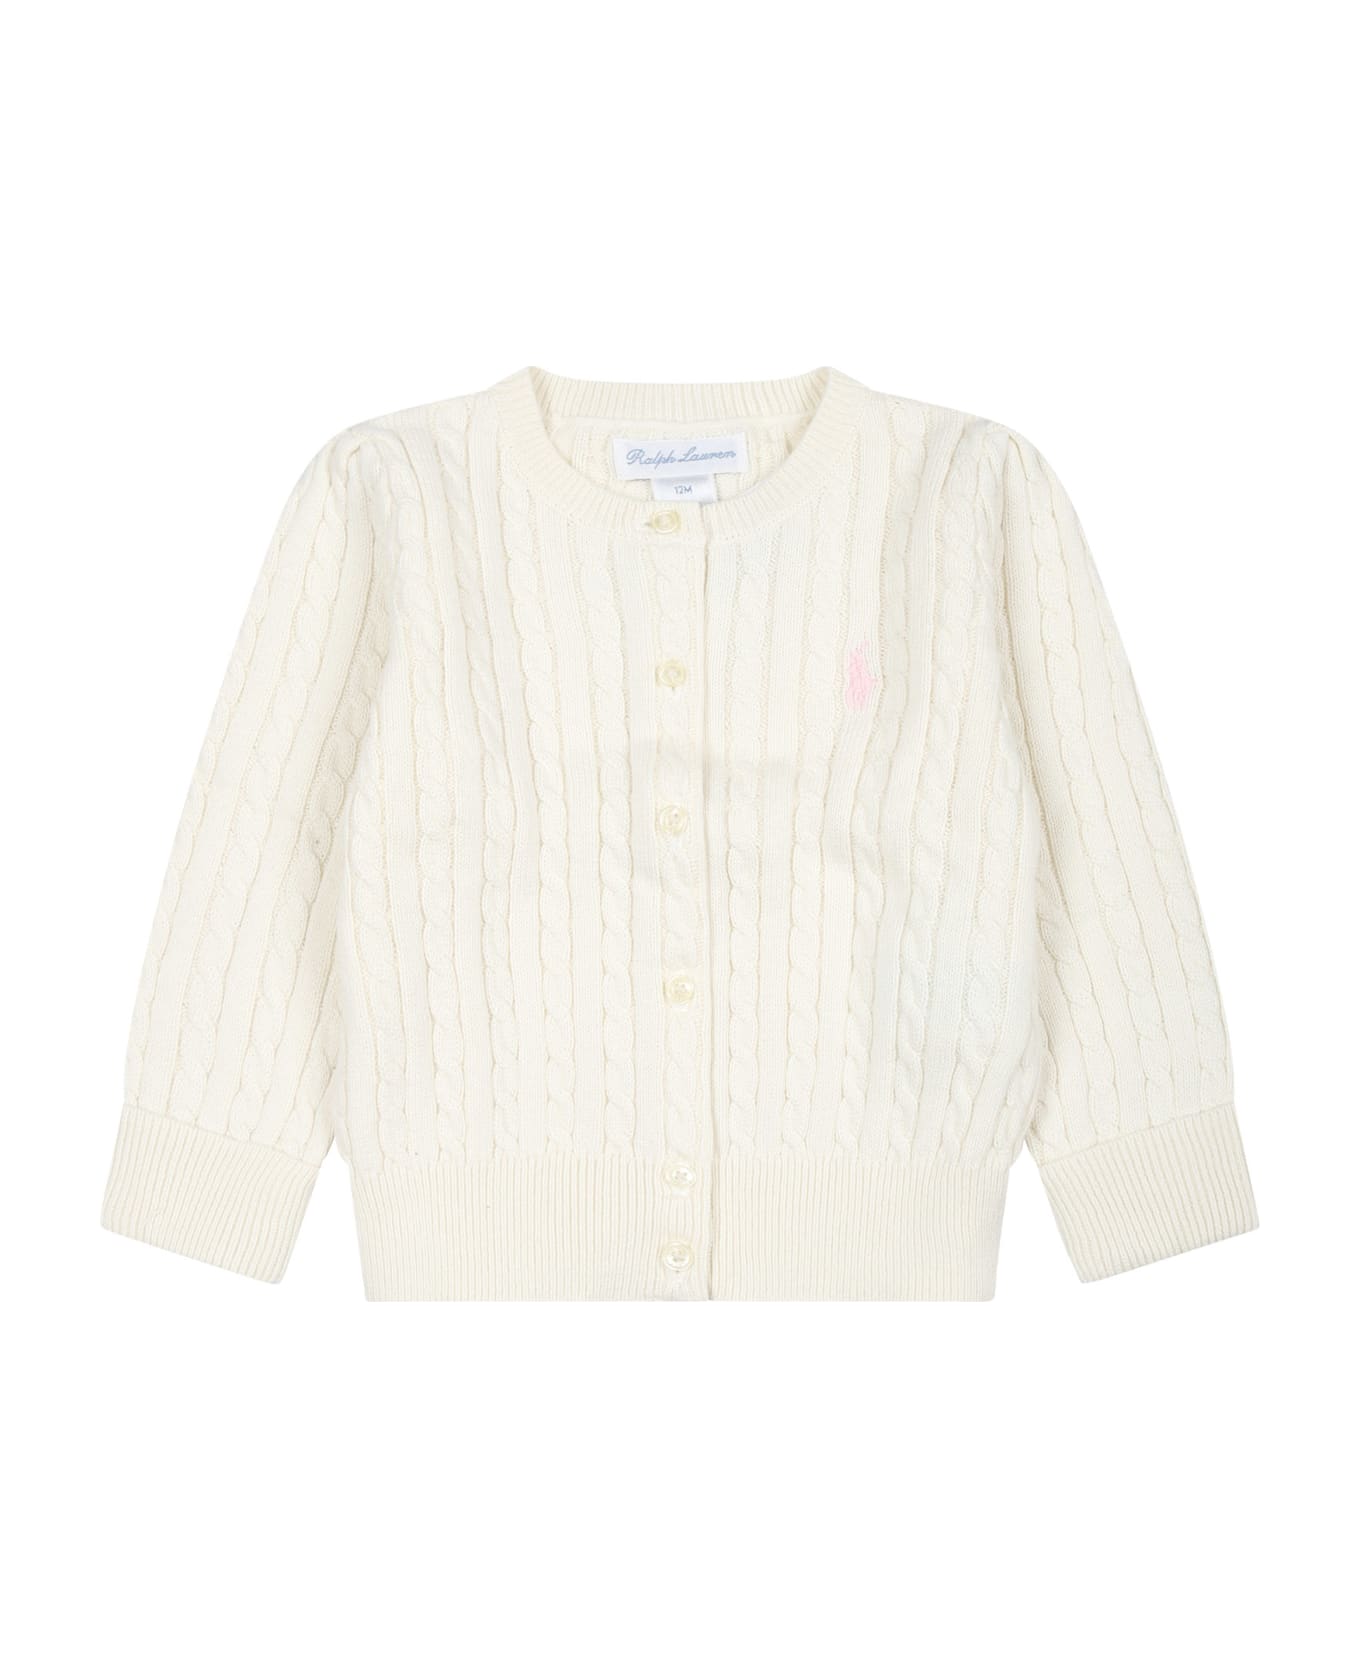 Ralph Lauren Ivory Cardigan For Babygirl With Iconic Pony - Ivory